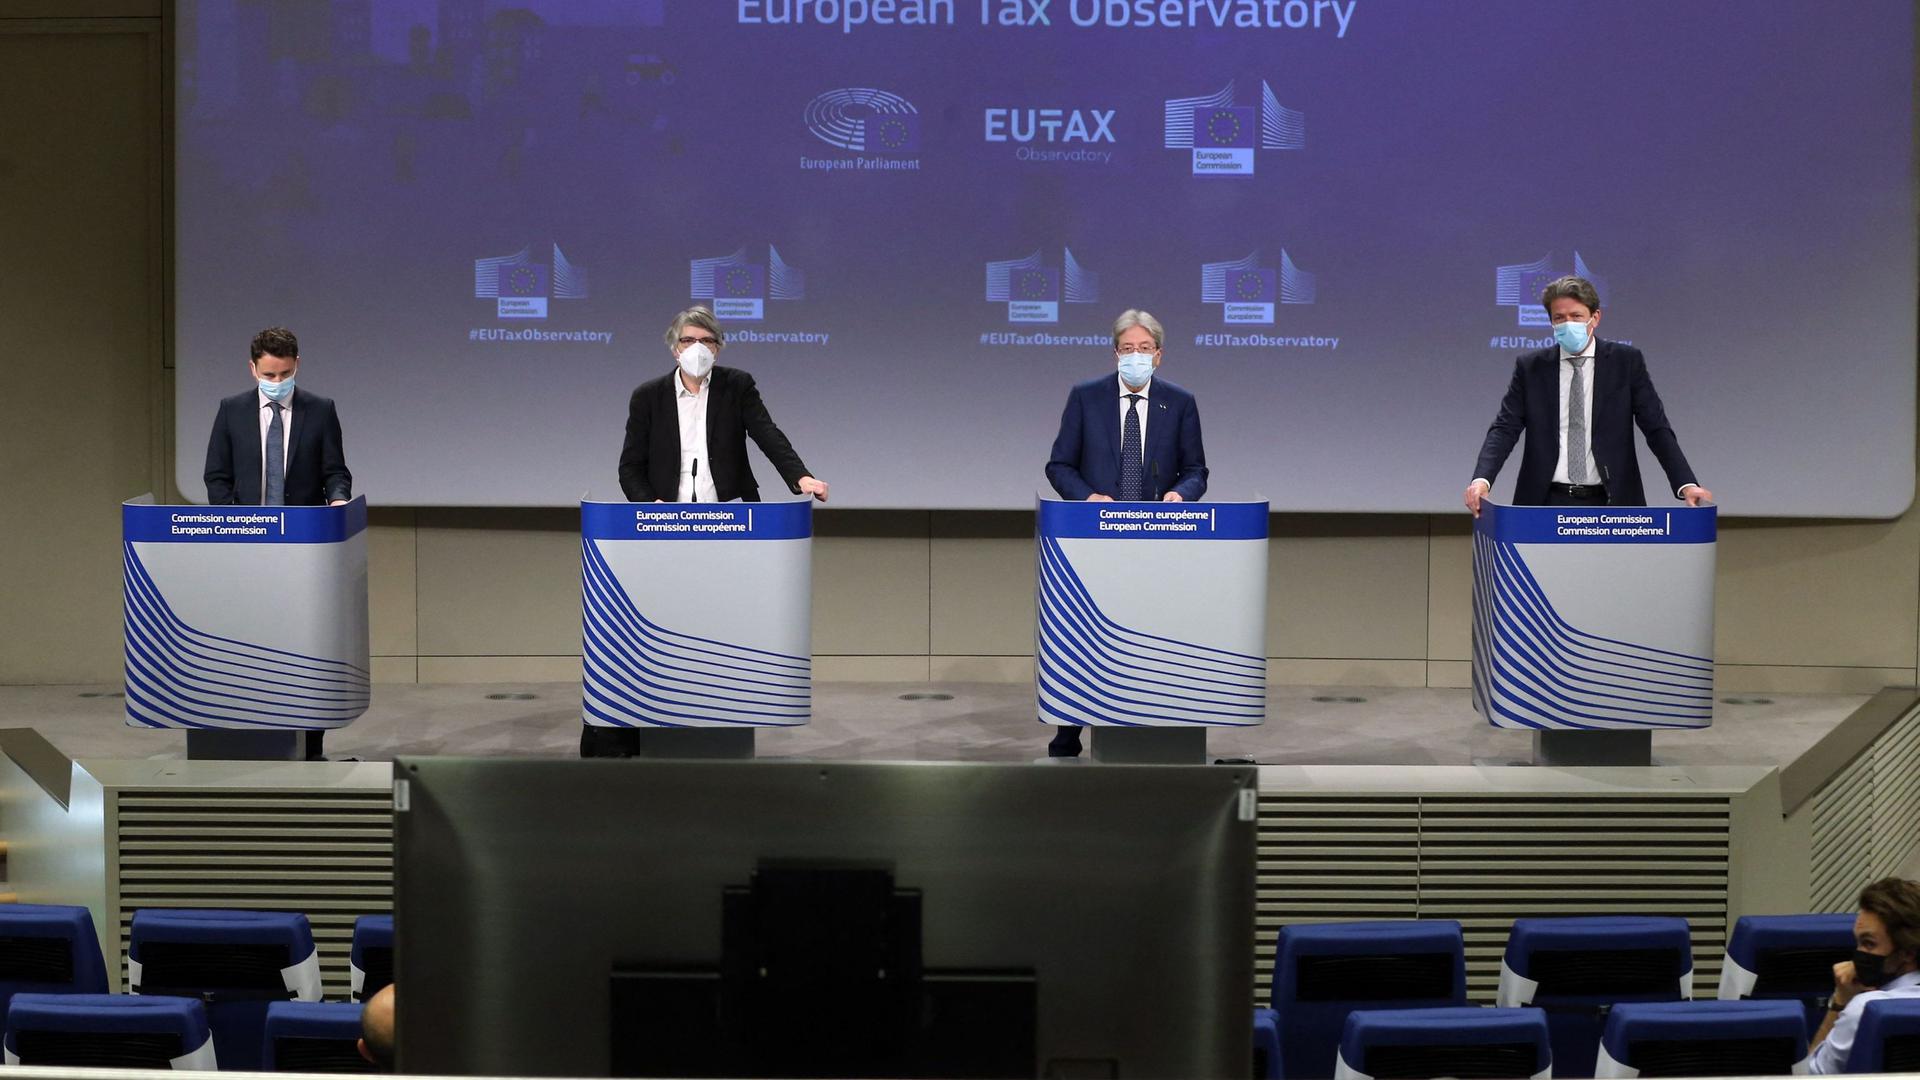 French economist Gabriel Zucman, German member of the European Parliament Sven Giegold, Economy Commissioner Paolo Gentiloni and Dutch European parliamentarian Paul Tang (left to right) launching the European Tax Observatory on Tuesday in Brussels. 